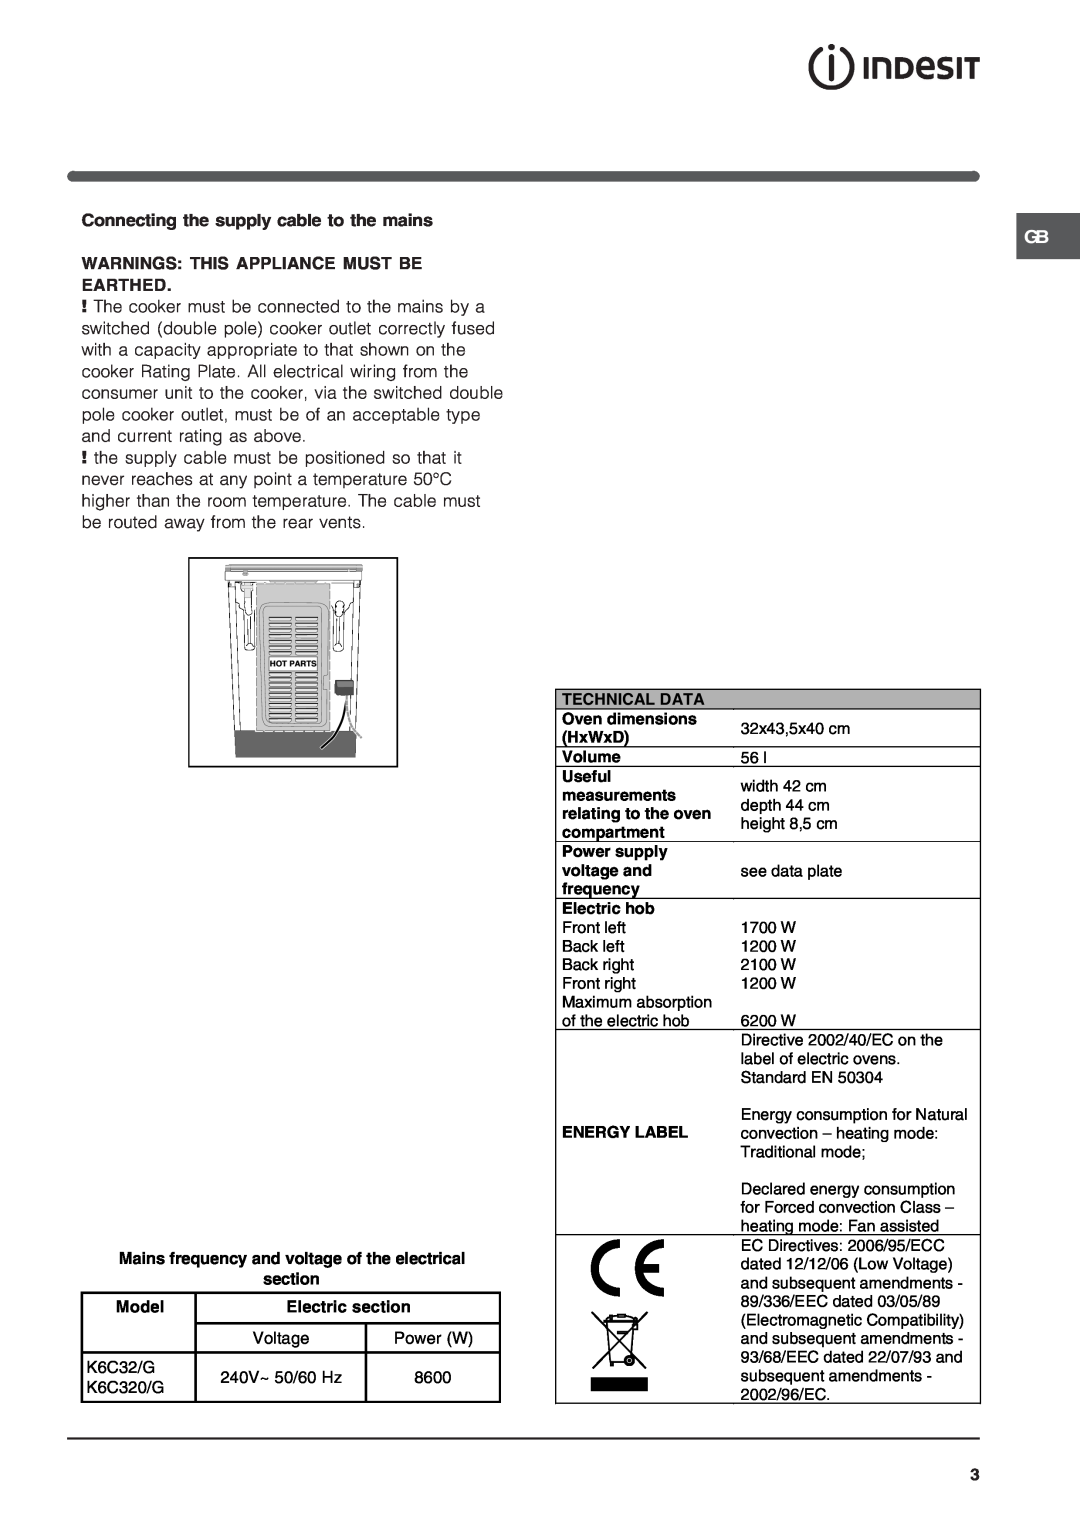 Indesit K6C32/G operating instructions Connecting the supply cable to the mains 